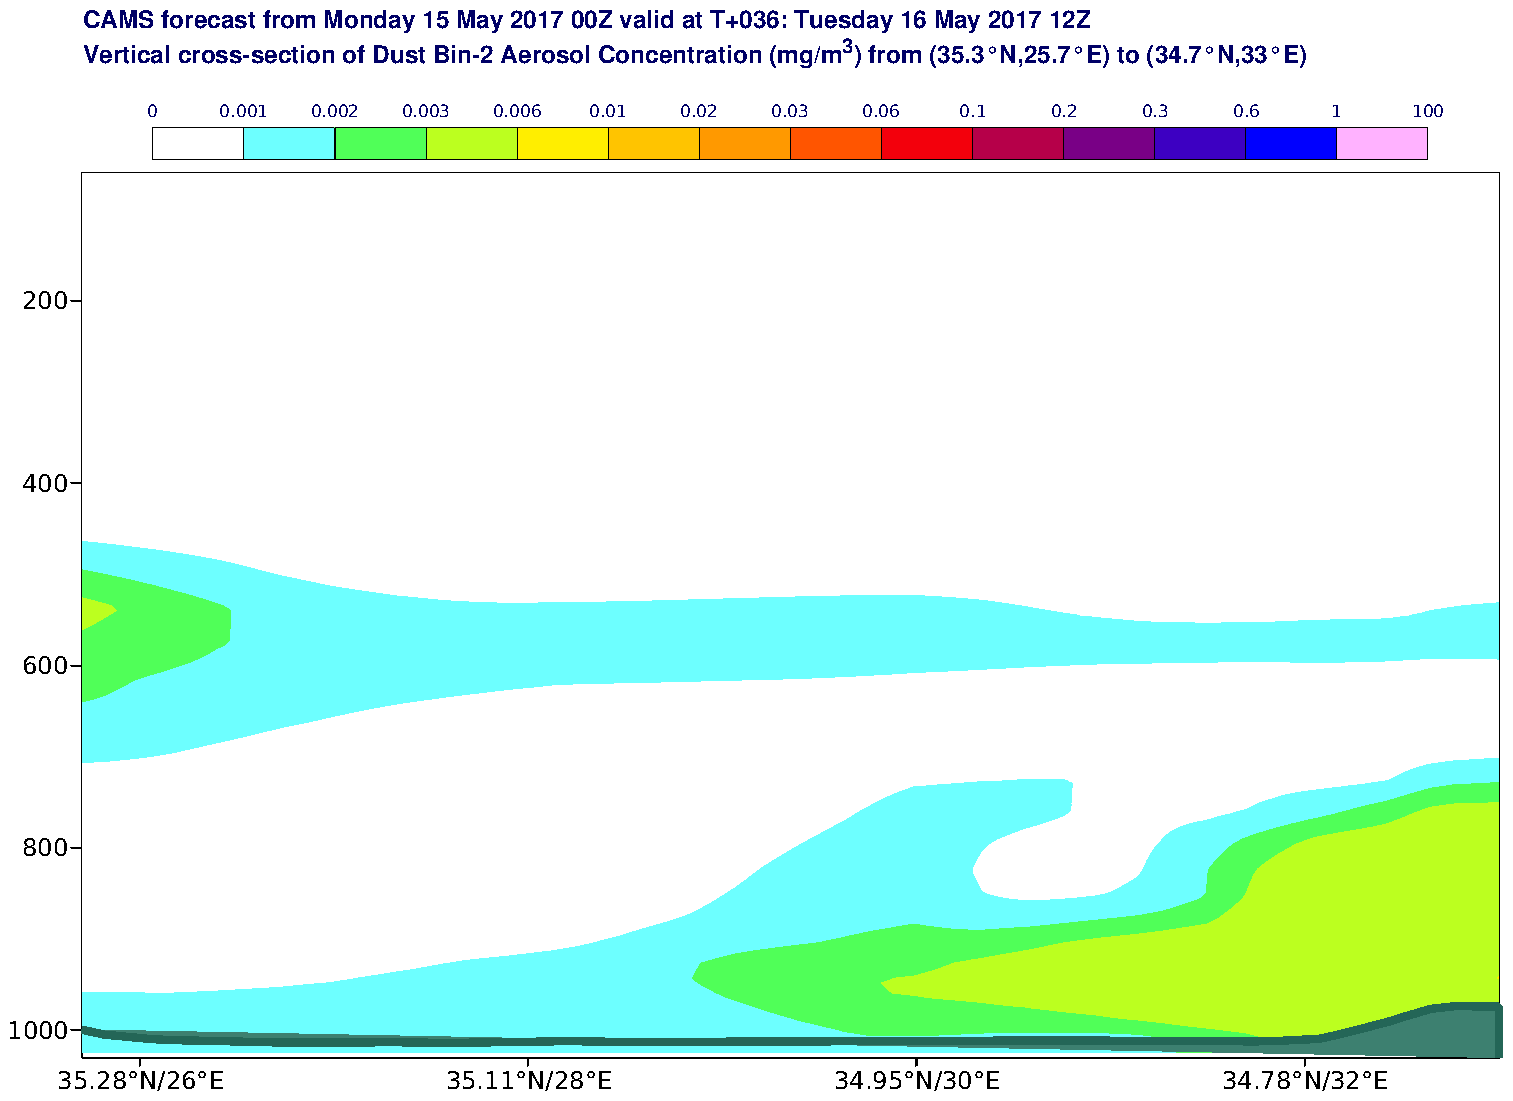 Vertical cross-section of Dust Bin-2 Aerosol Concentration (mg/m3) valid at T36 - 2017-05-16 12:00